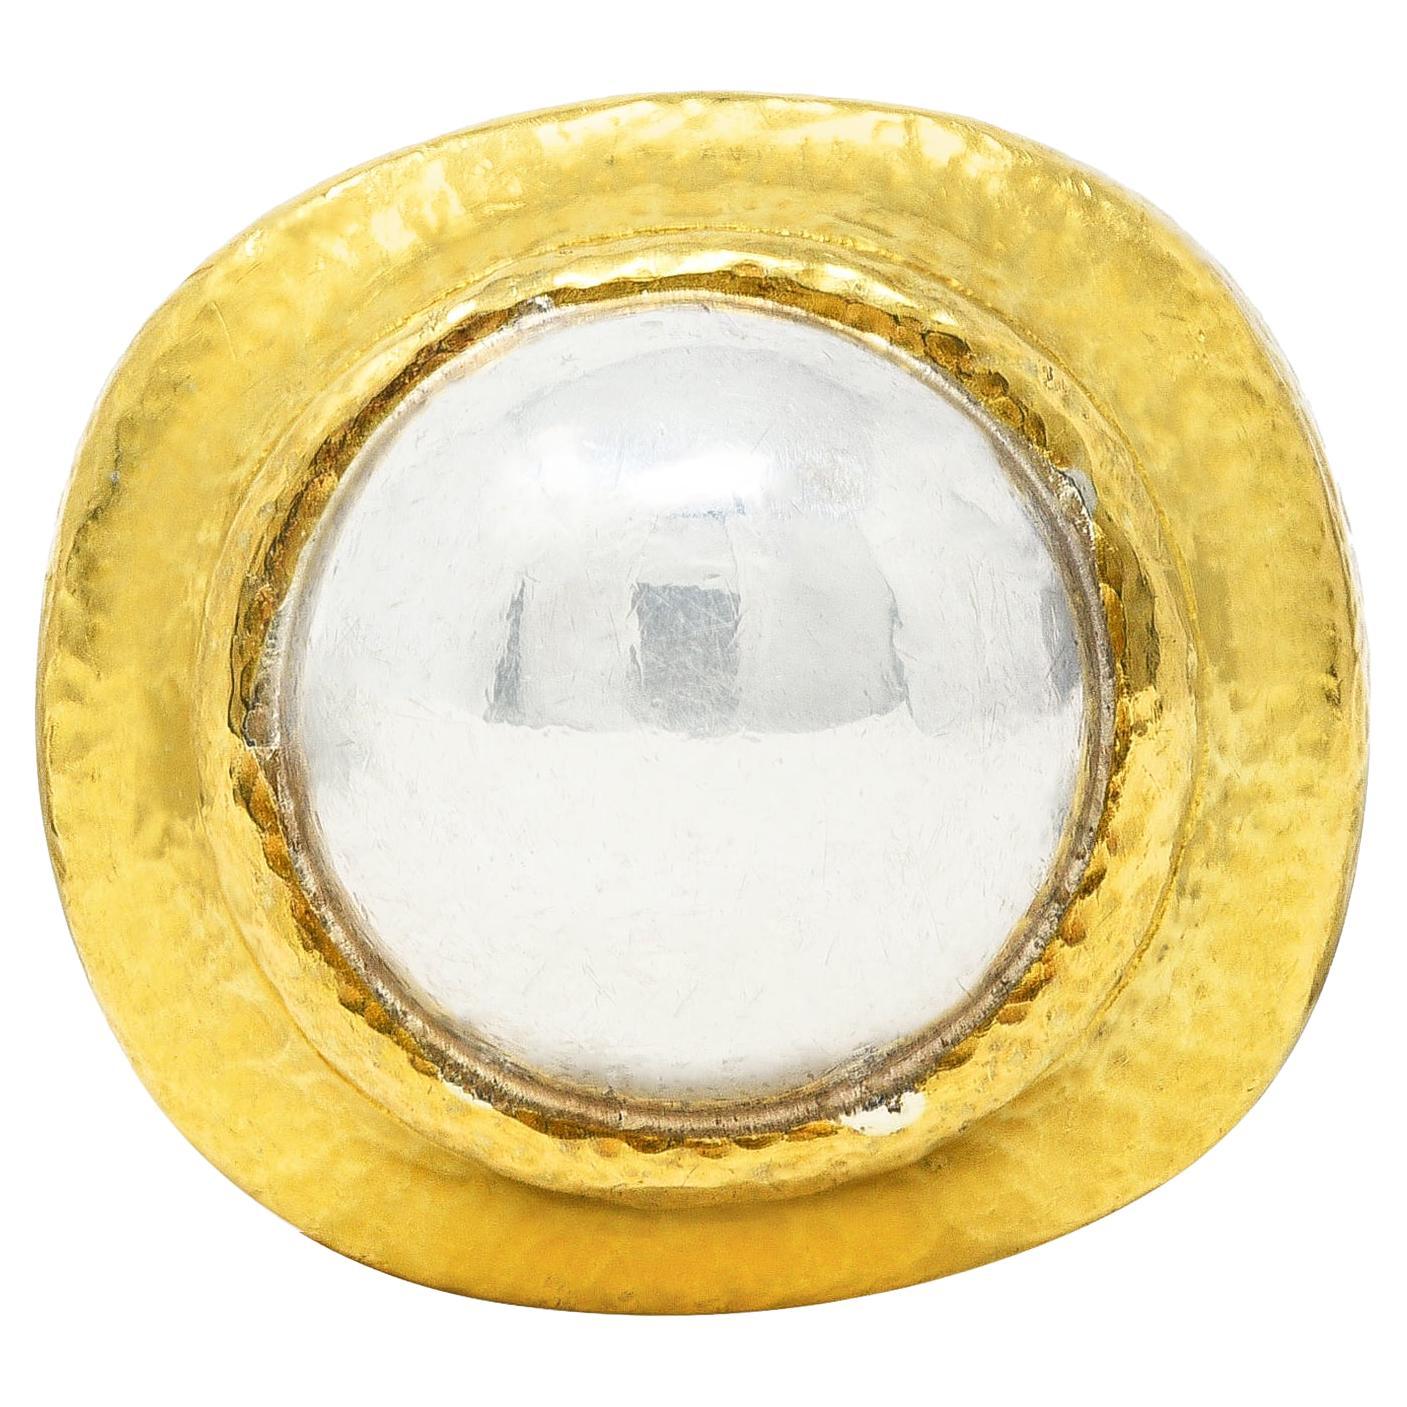 Centering a 13.3 mm round platinum dome with high polished finish. Bezel set with a recessed cushion shaped surround. Featuring a fine hammered texture throughout. Stamped for 22 karat gold and platinum. Numbered and signed Zolotas. Circa: 1980's.